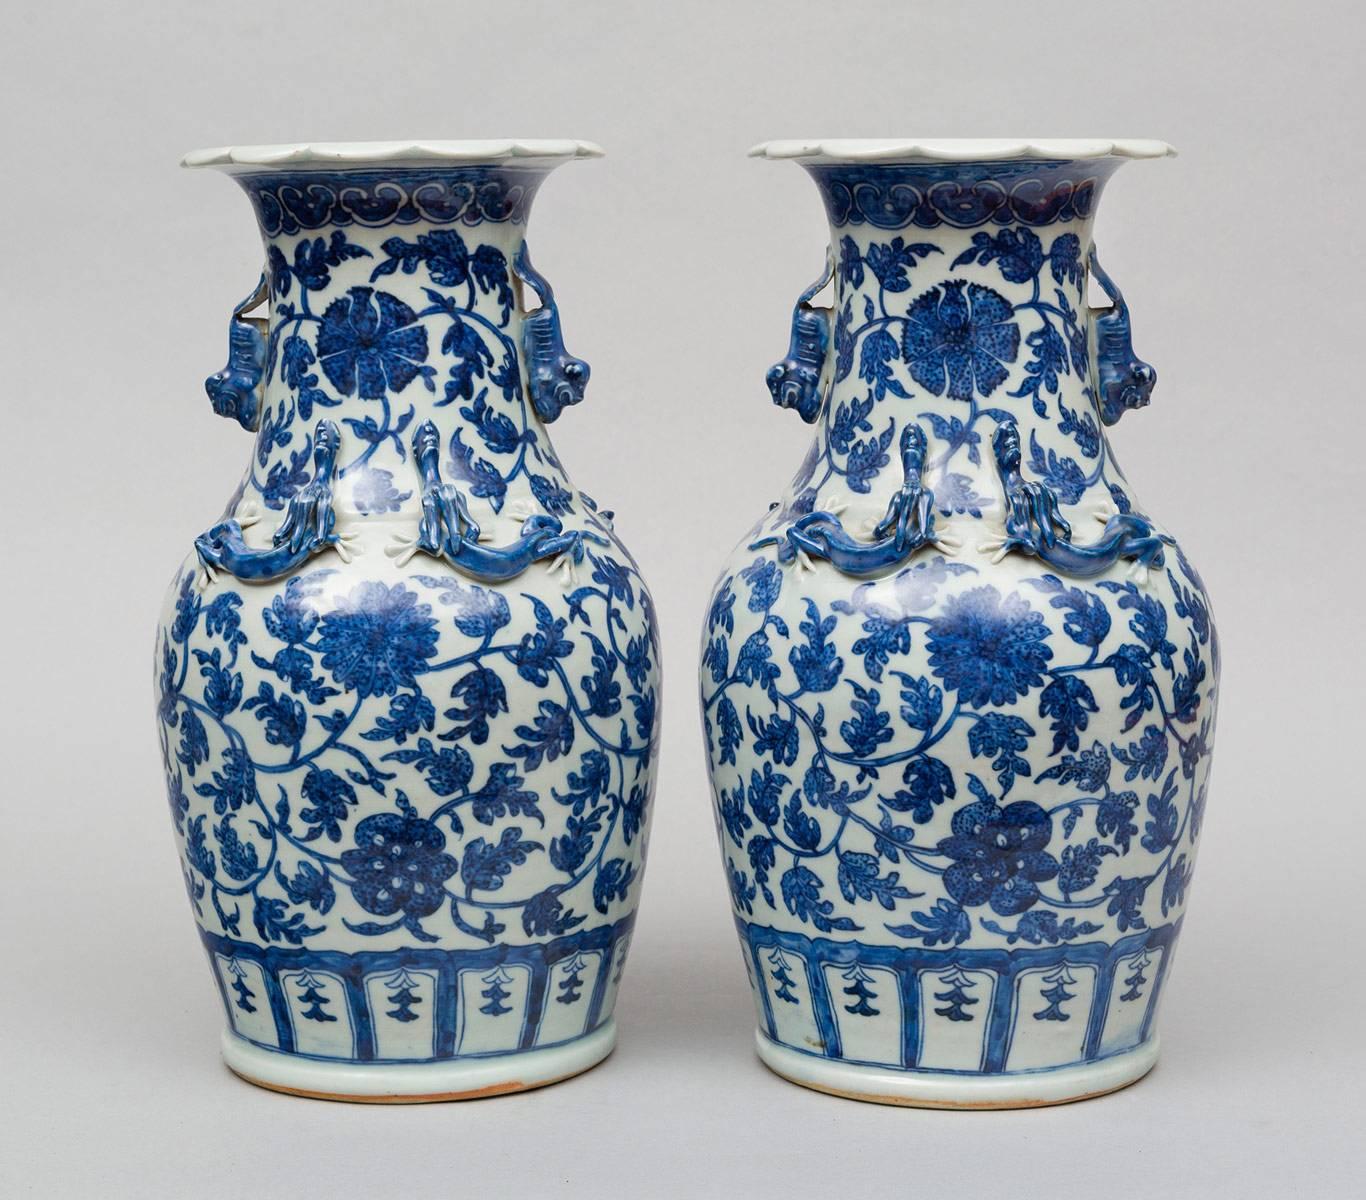 Pair of Chinese blue and white open baluster-shaped vases with turn-over scalloped rims, decorated with applied foo dog handles at the neck and the body with pairs of applied dragons front and back, the whole decorated with meandering scrolls of